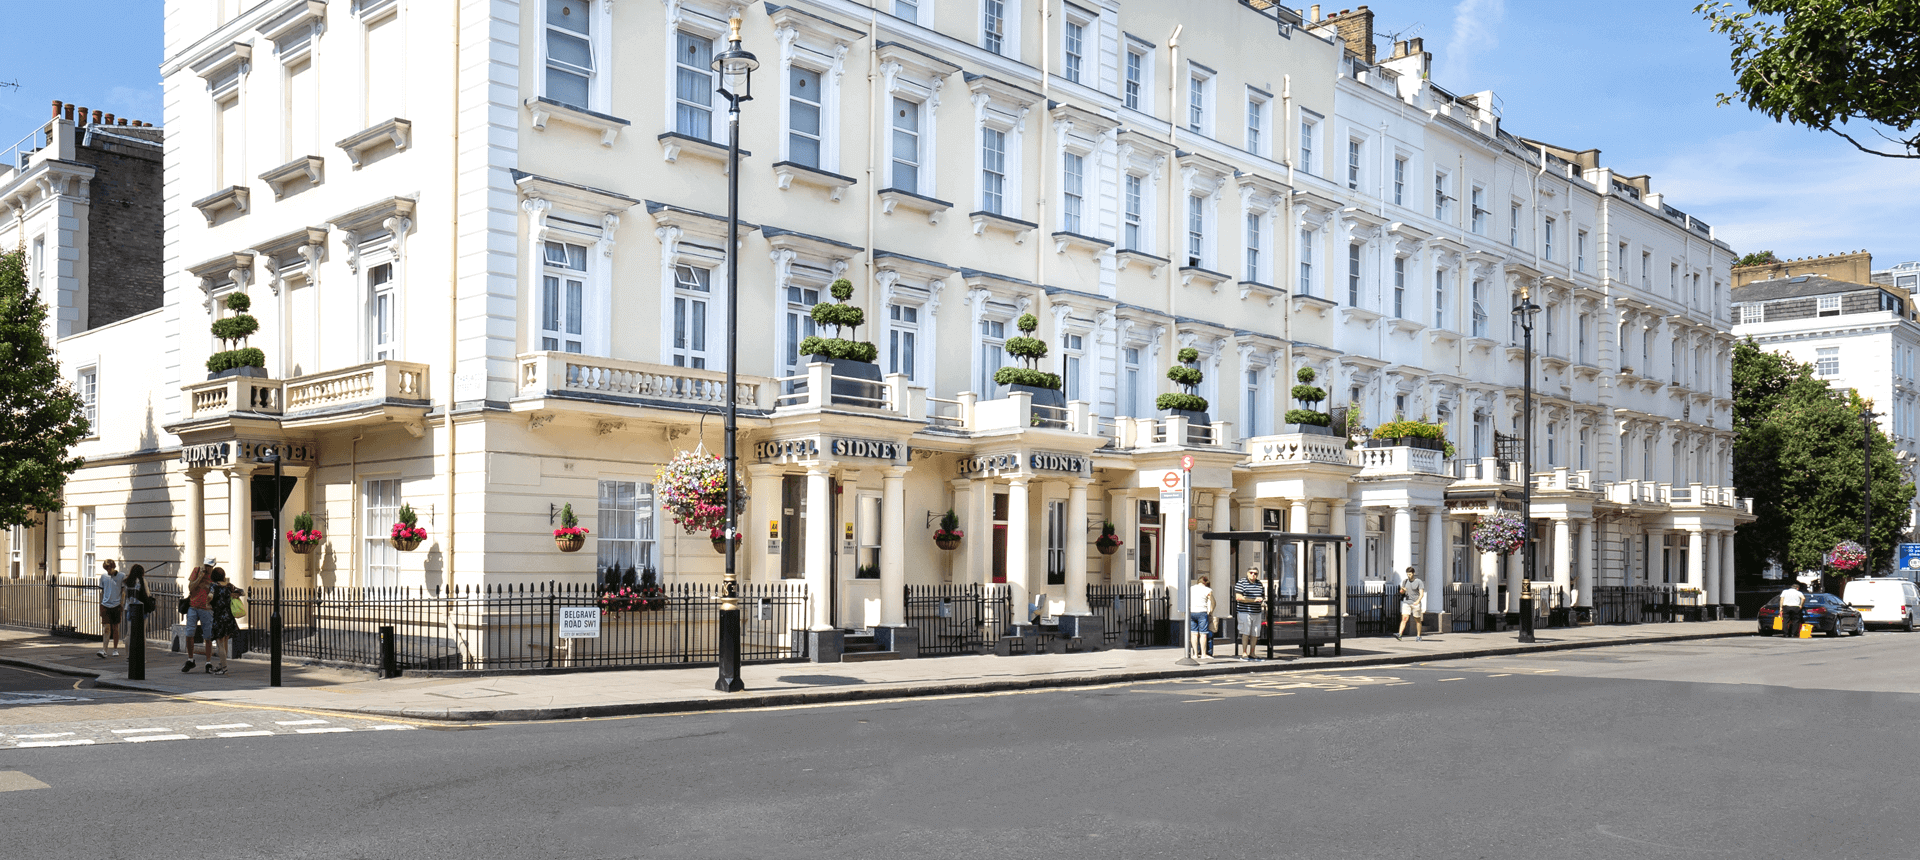 Budget Hotels In London Victoria